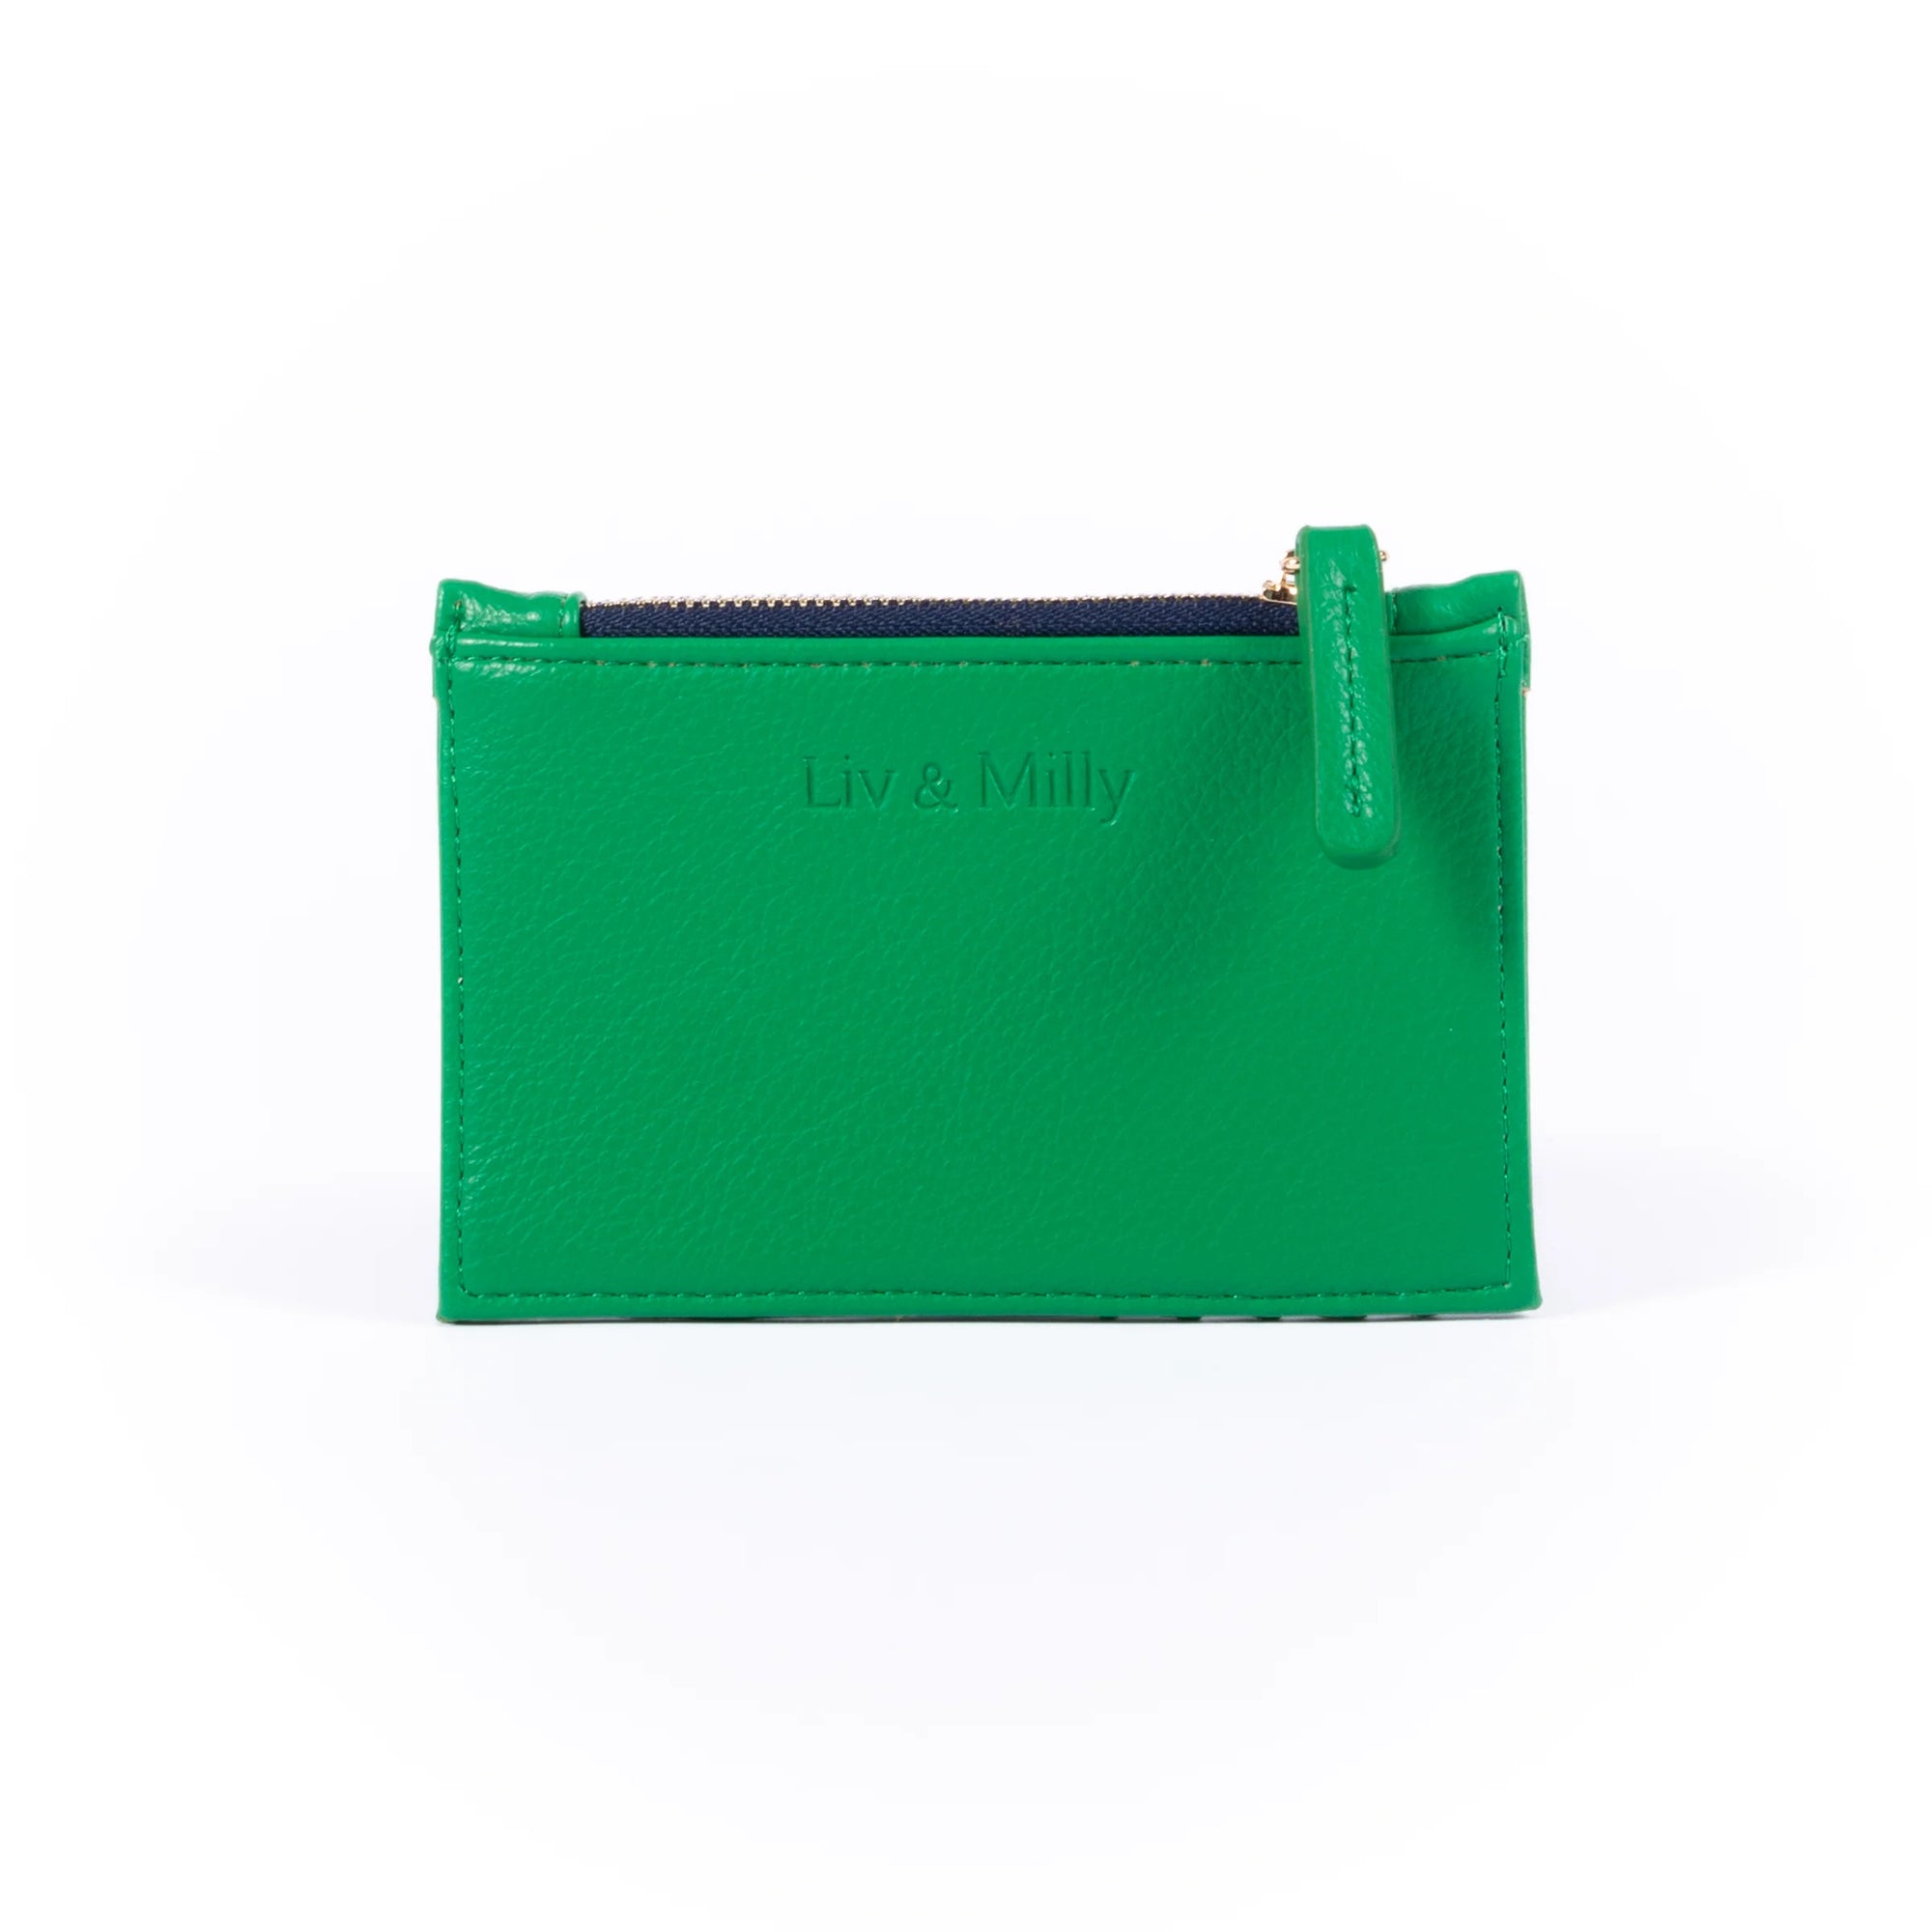 Mill & Hide - Liv & Milly - Card Wallet - Green